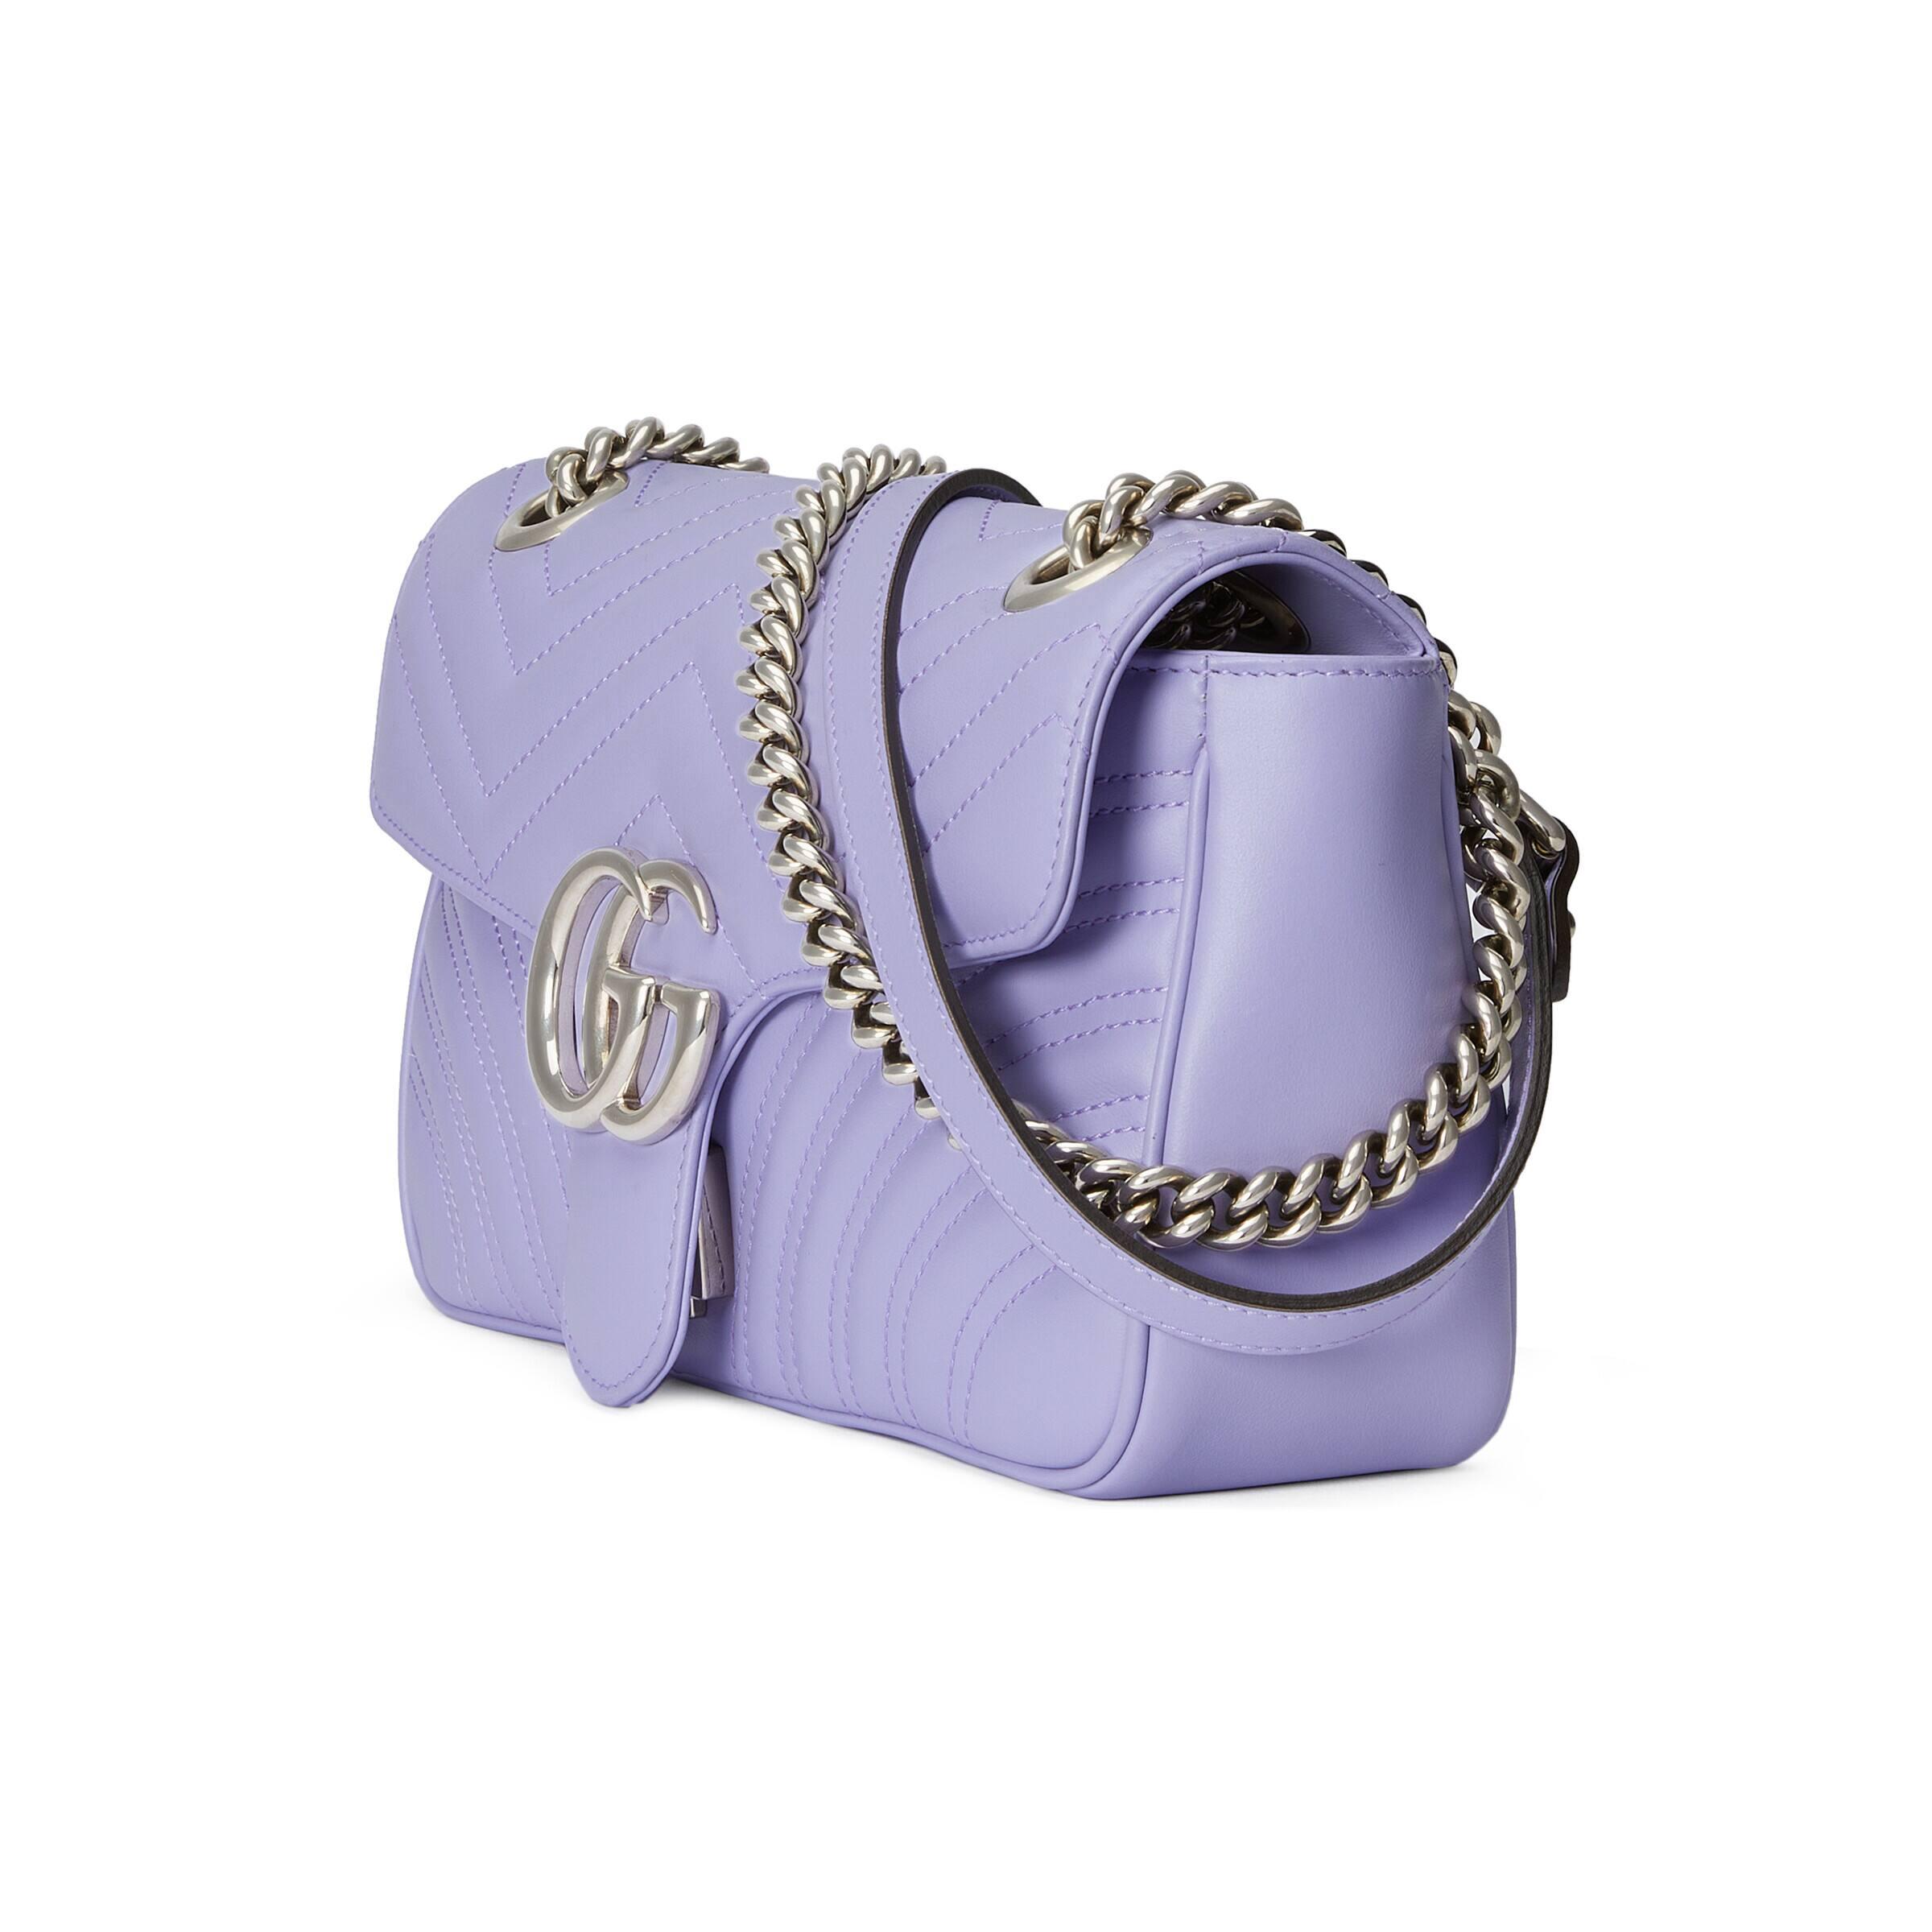 GG Marmont Small Leather Shoulder Bag in Purple - Gucci